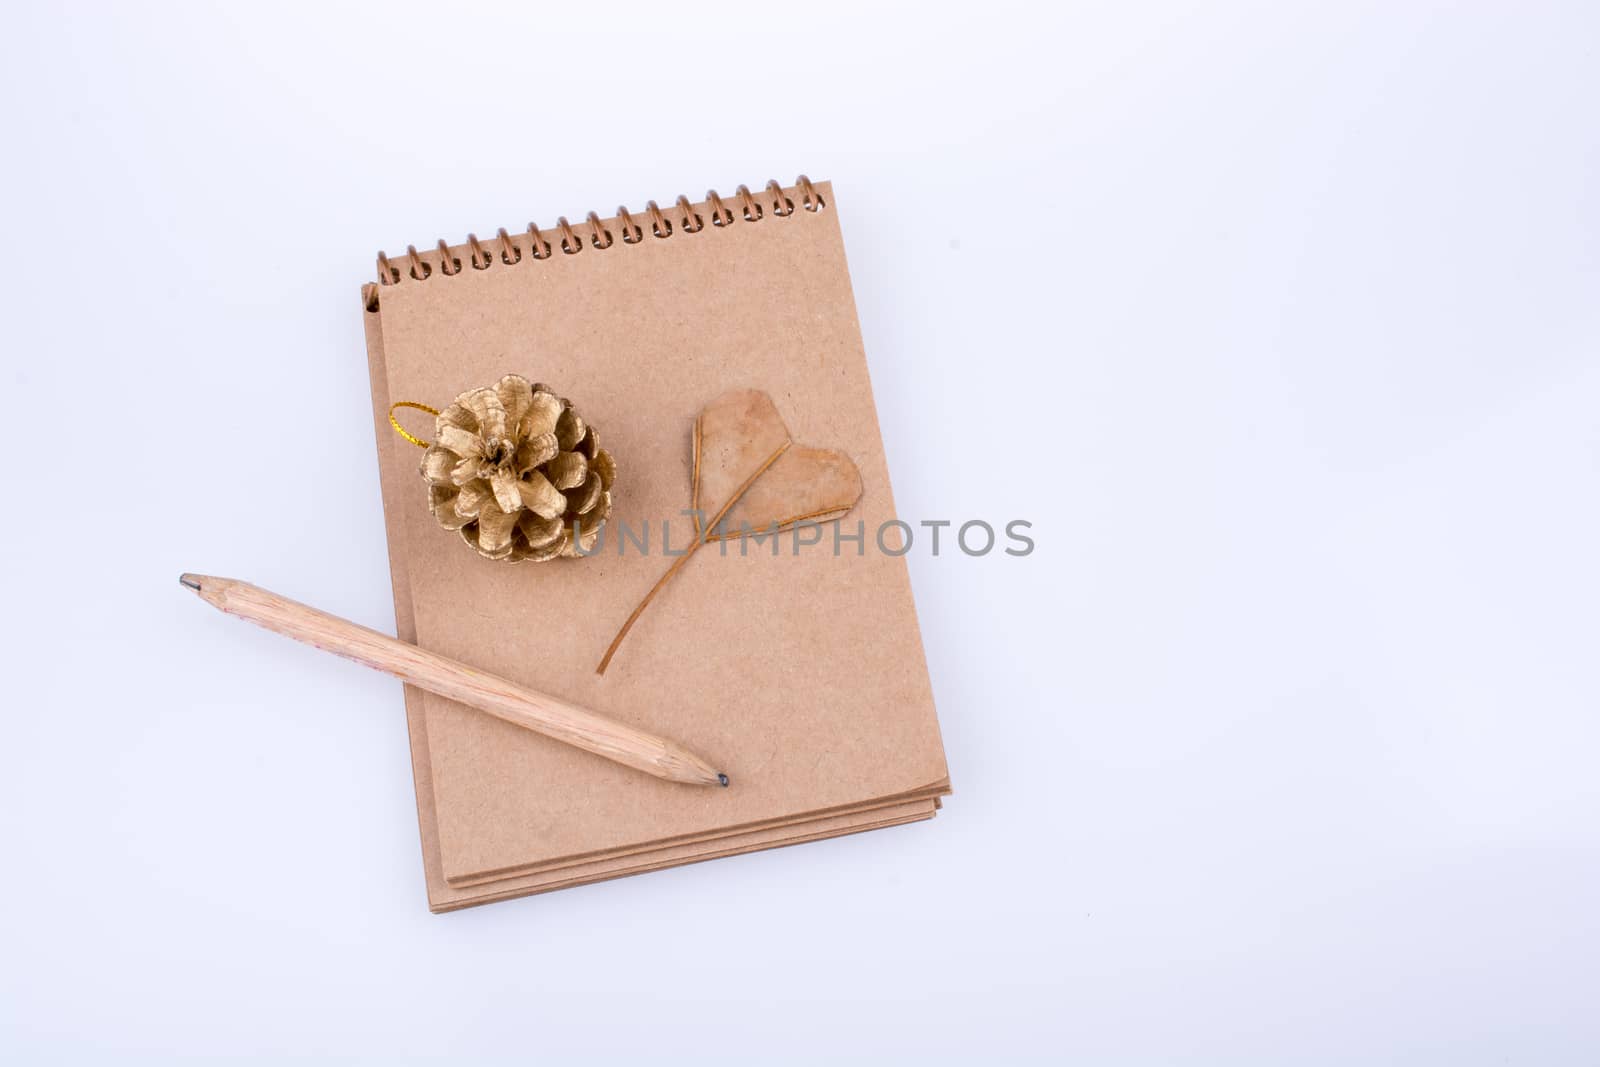 Heart shaped leaf,  pine cone and a pencil on a notebook by berkay